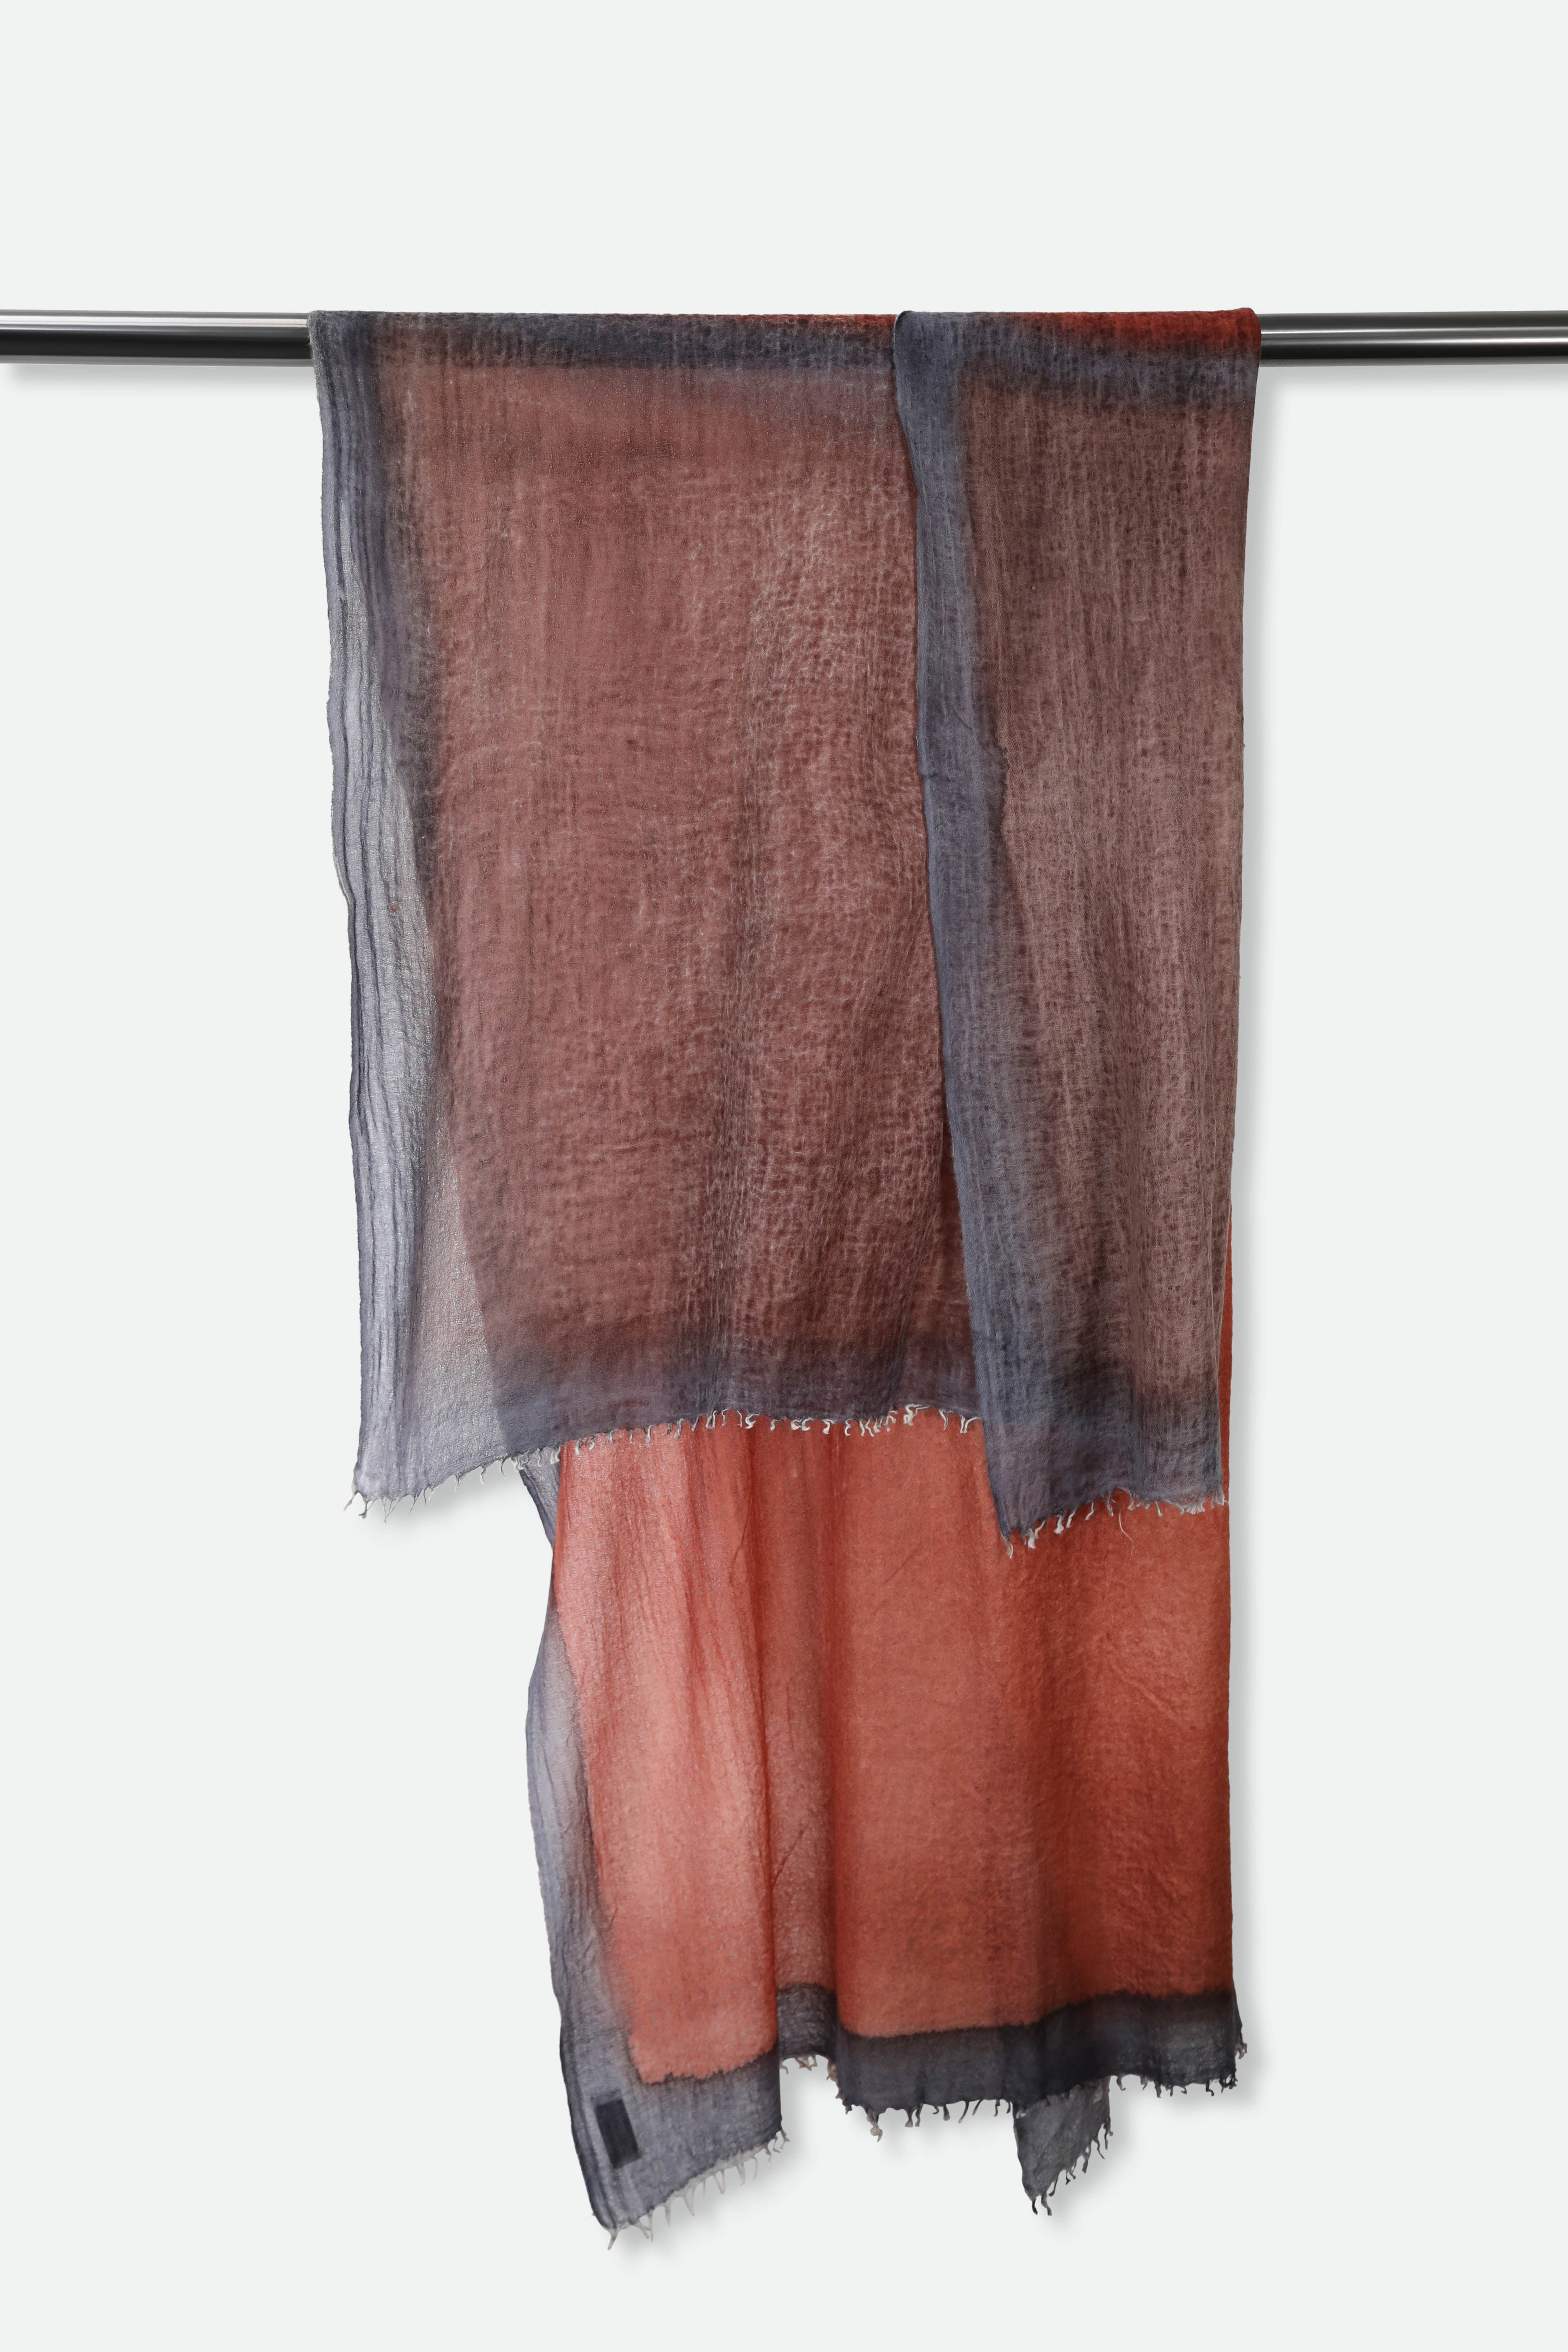 CHESTNUT SCARF IN HAND DYED CASHMERE - Jarbo